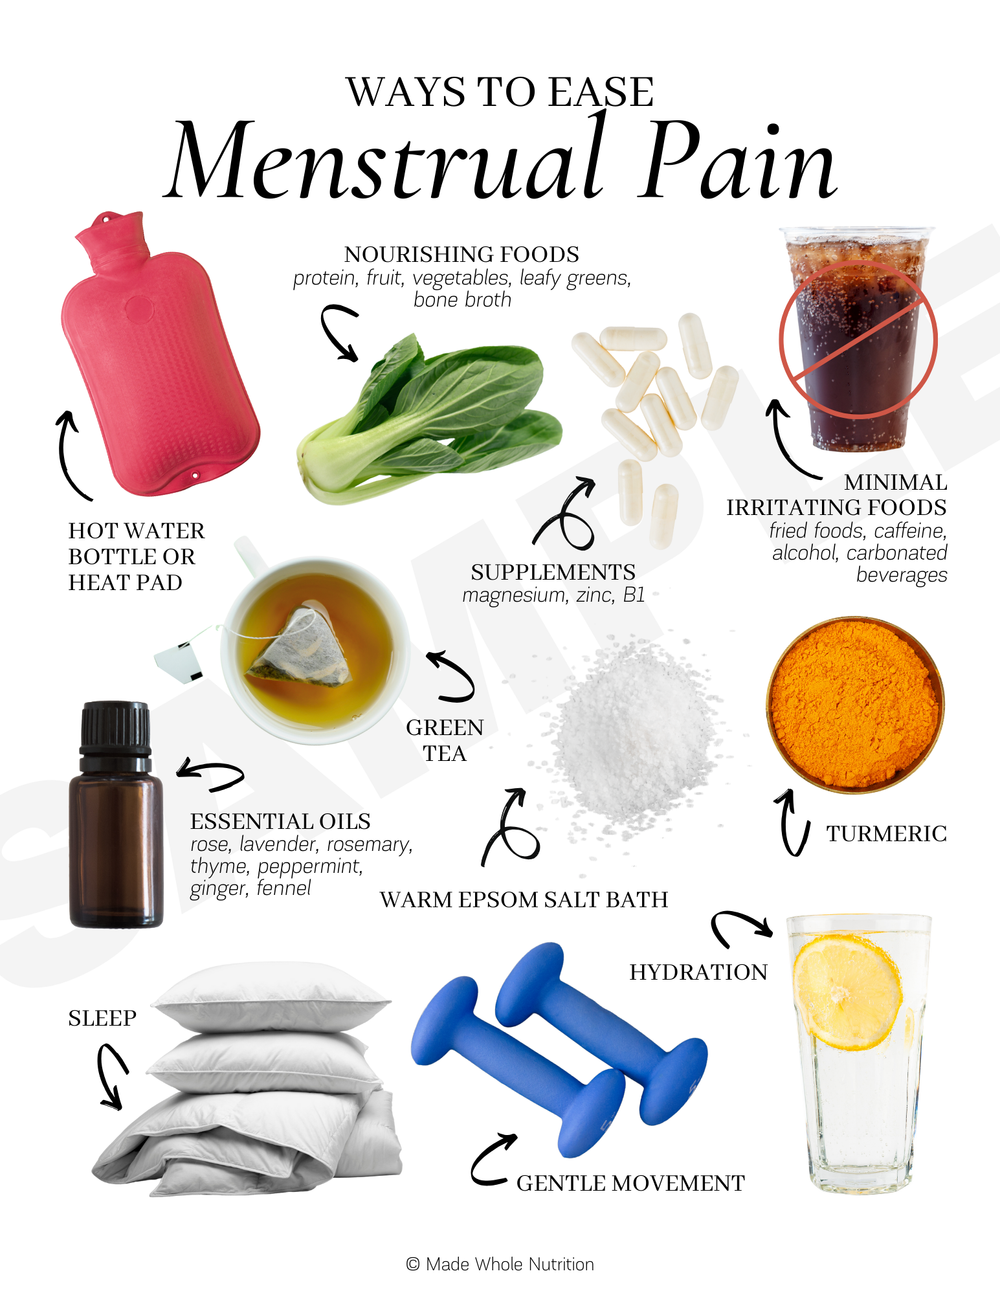 Ways to Ease Menstrual Pain